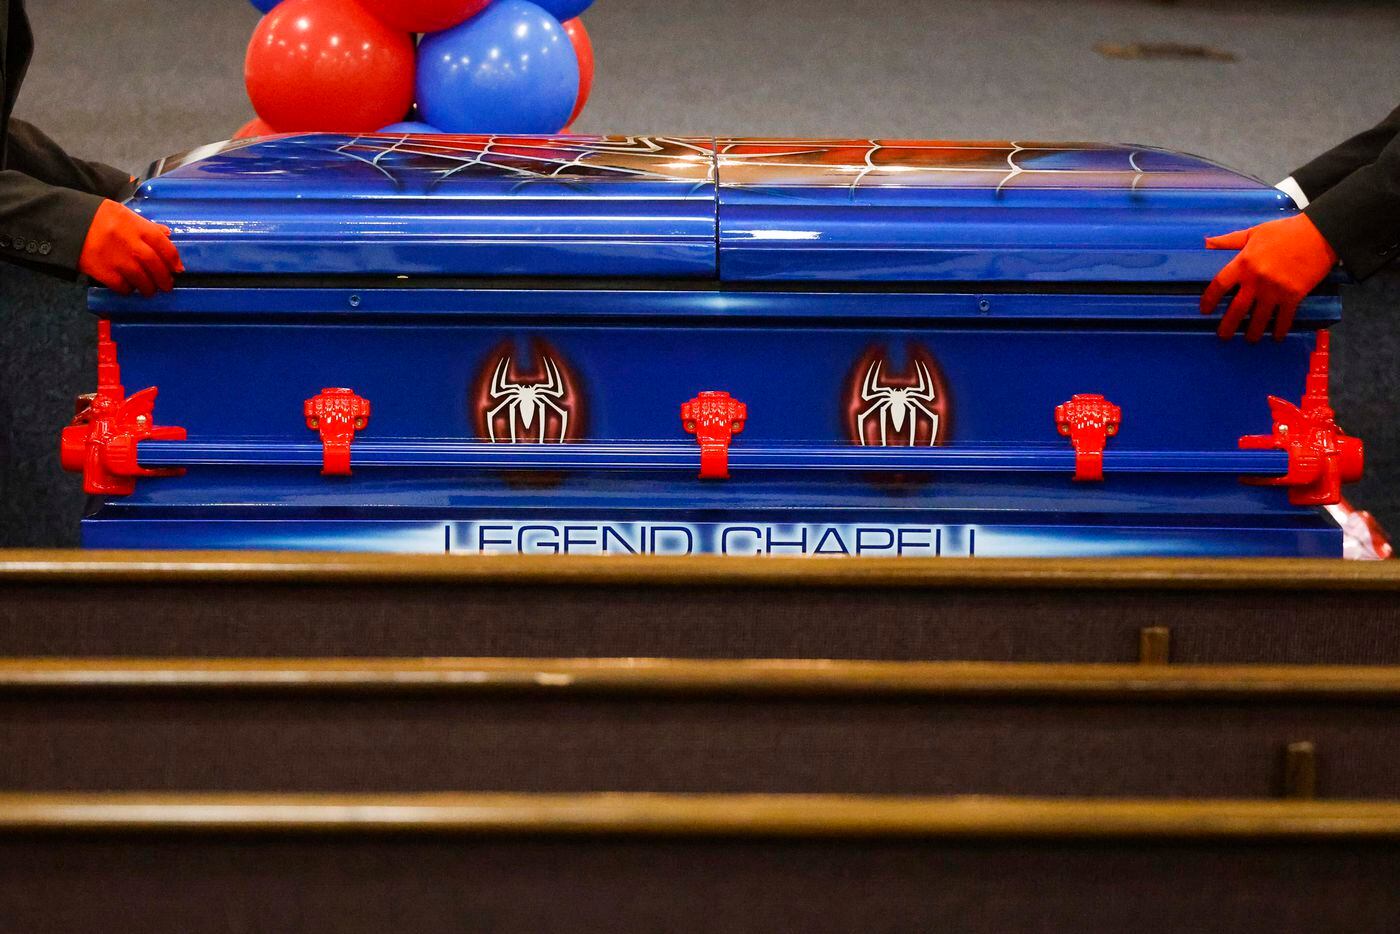 Pallbearers roll a red and blue Spider-Man themed casket of late Legend Chappell after a...